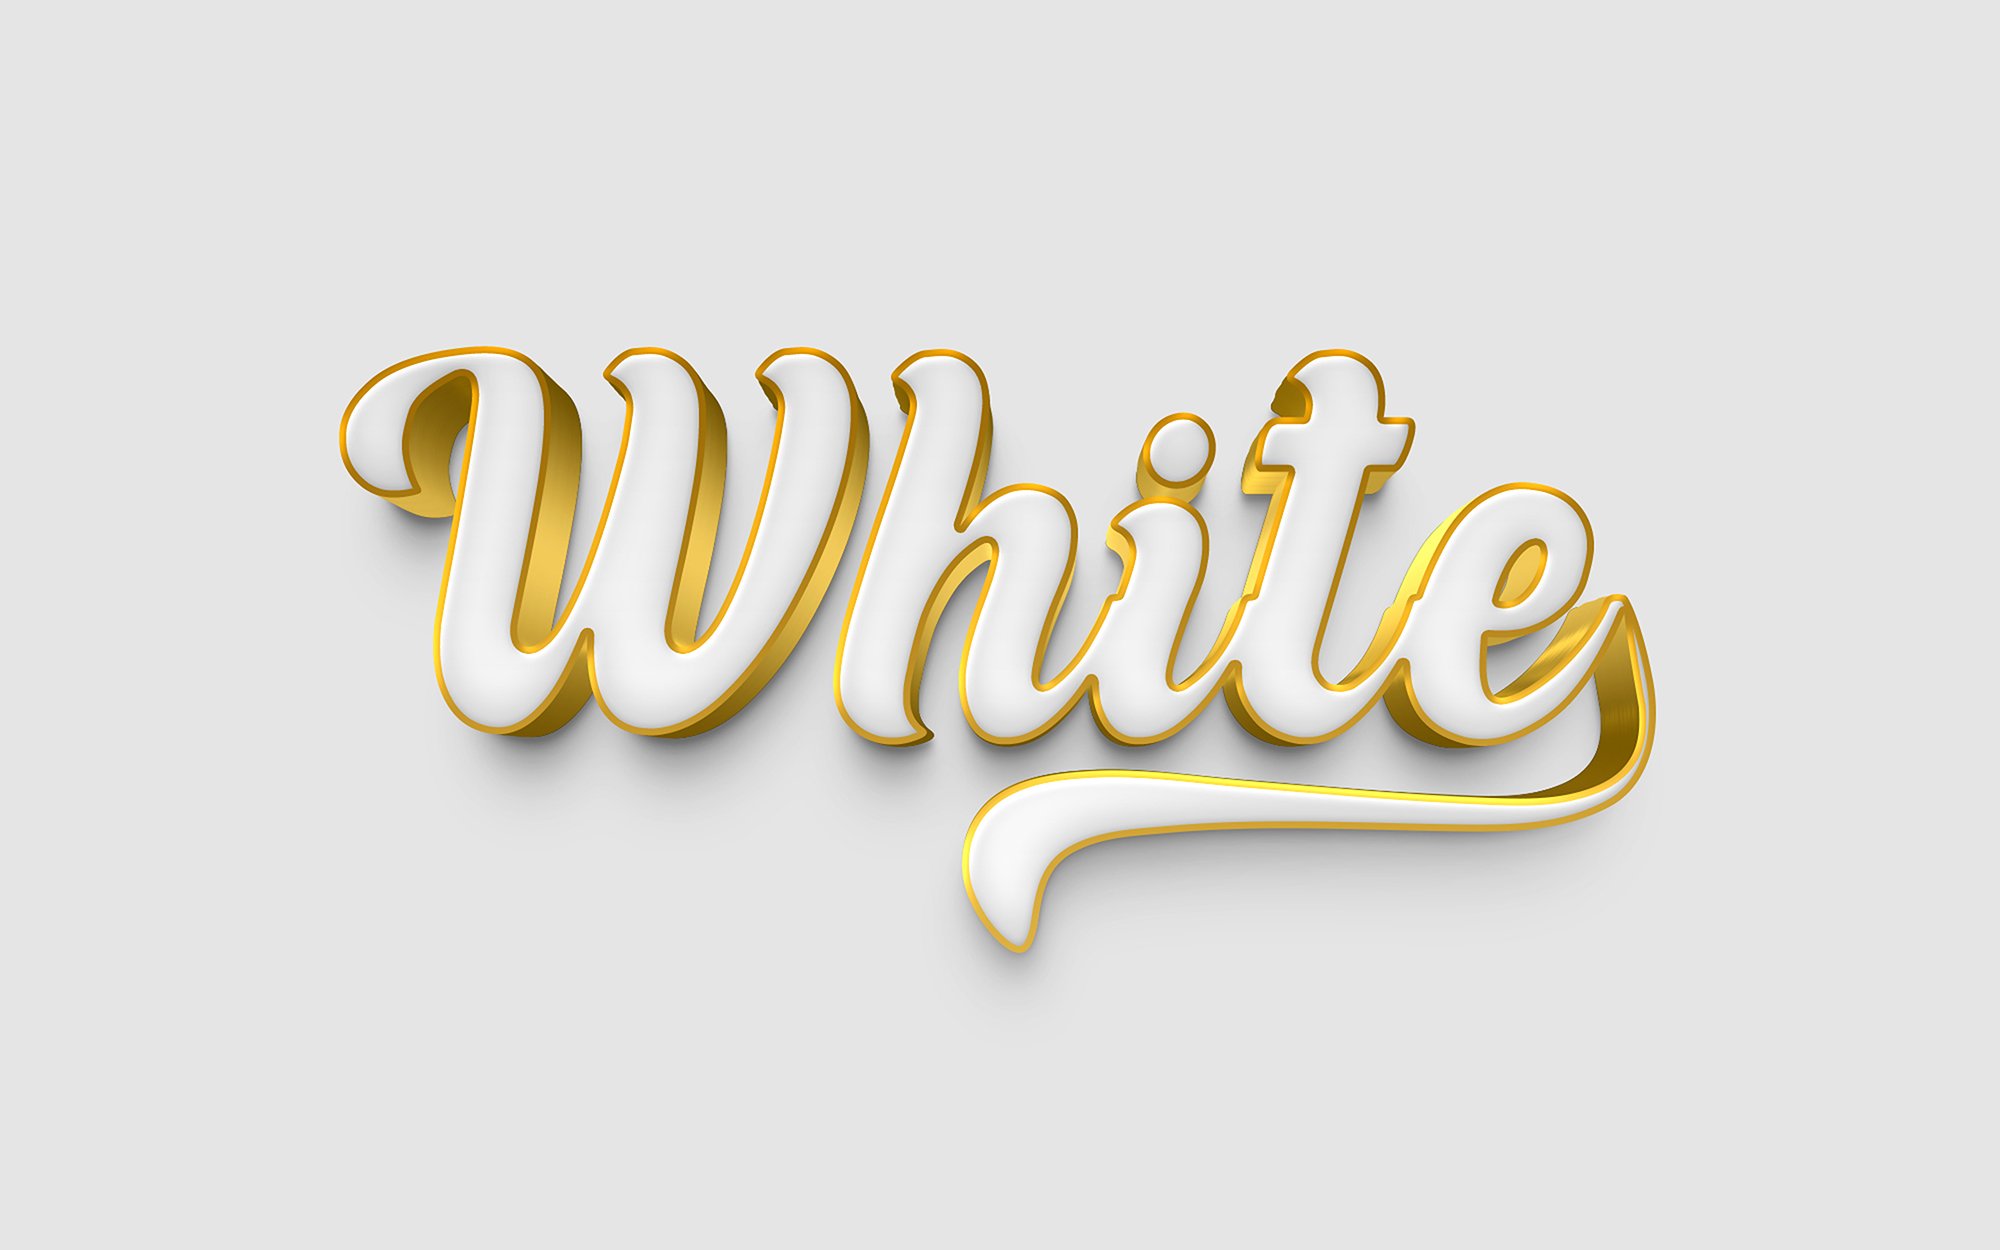 White 3d Editable Text Effect Stylecover image.